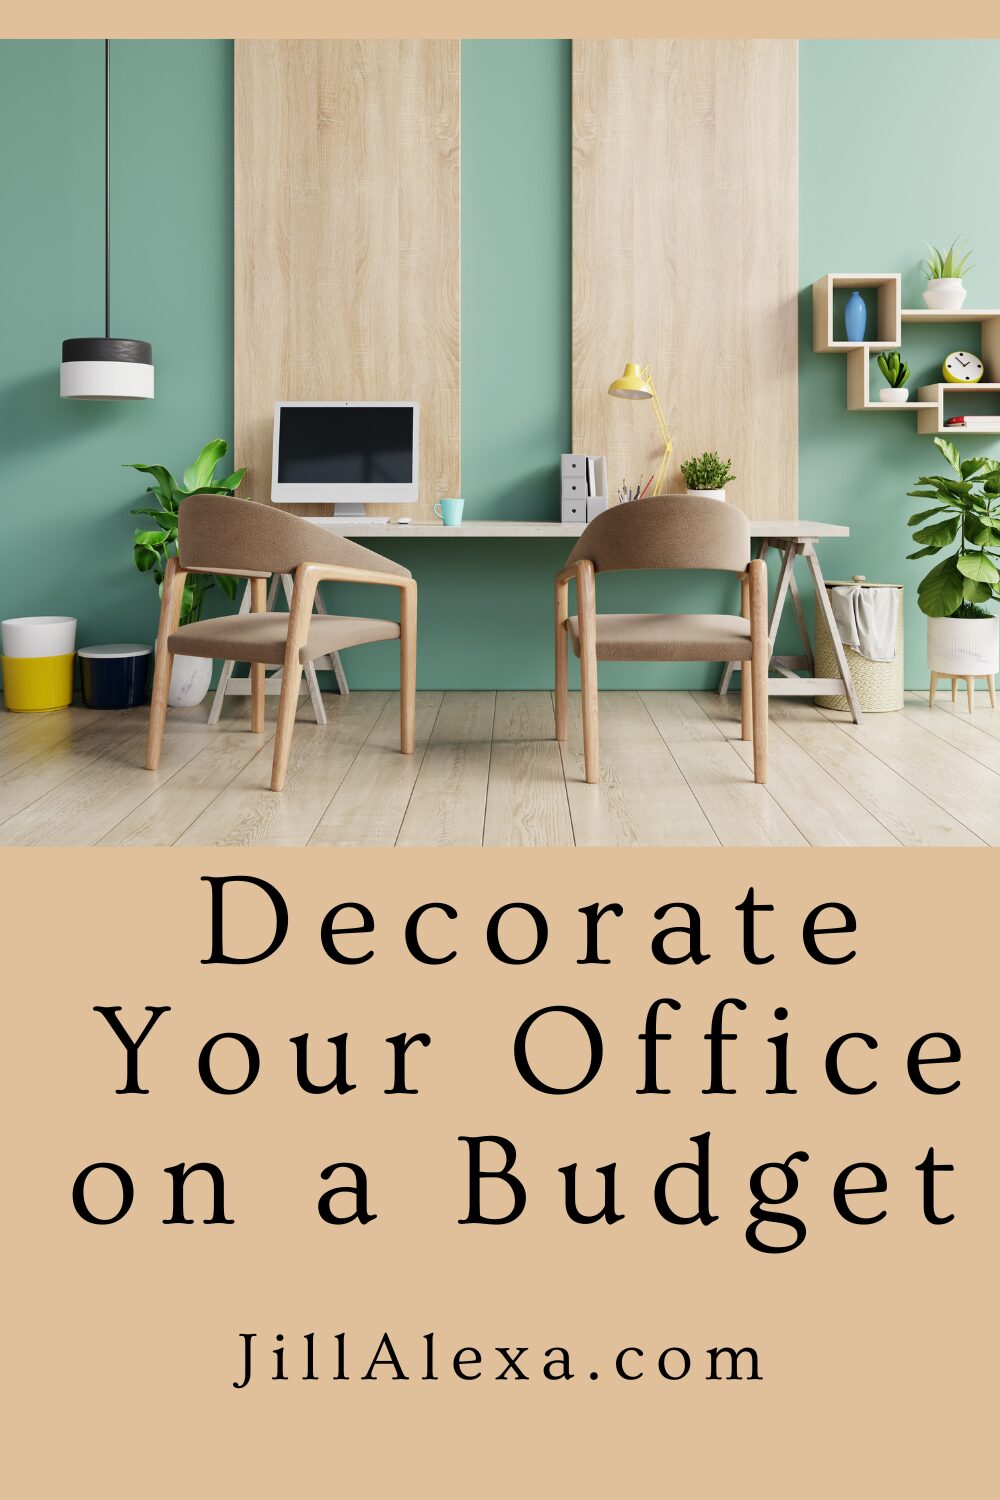 Your working environment is important. The surroundings in which you do your job can have a huge impact on your productivity, stress levels, and mental health.If your office is attractive and calming, you can get your best work done. But on the other hand, if your workspace is messy, drab, or uninspiring it will have the opposite effect.